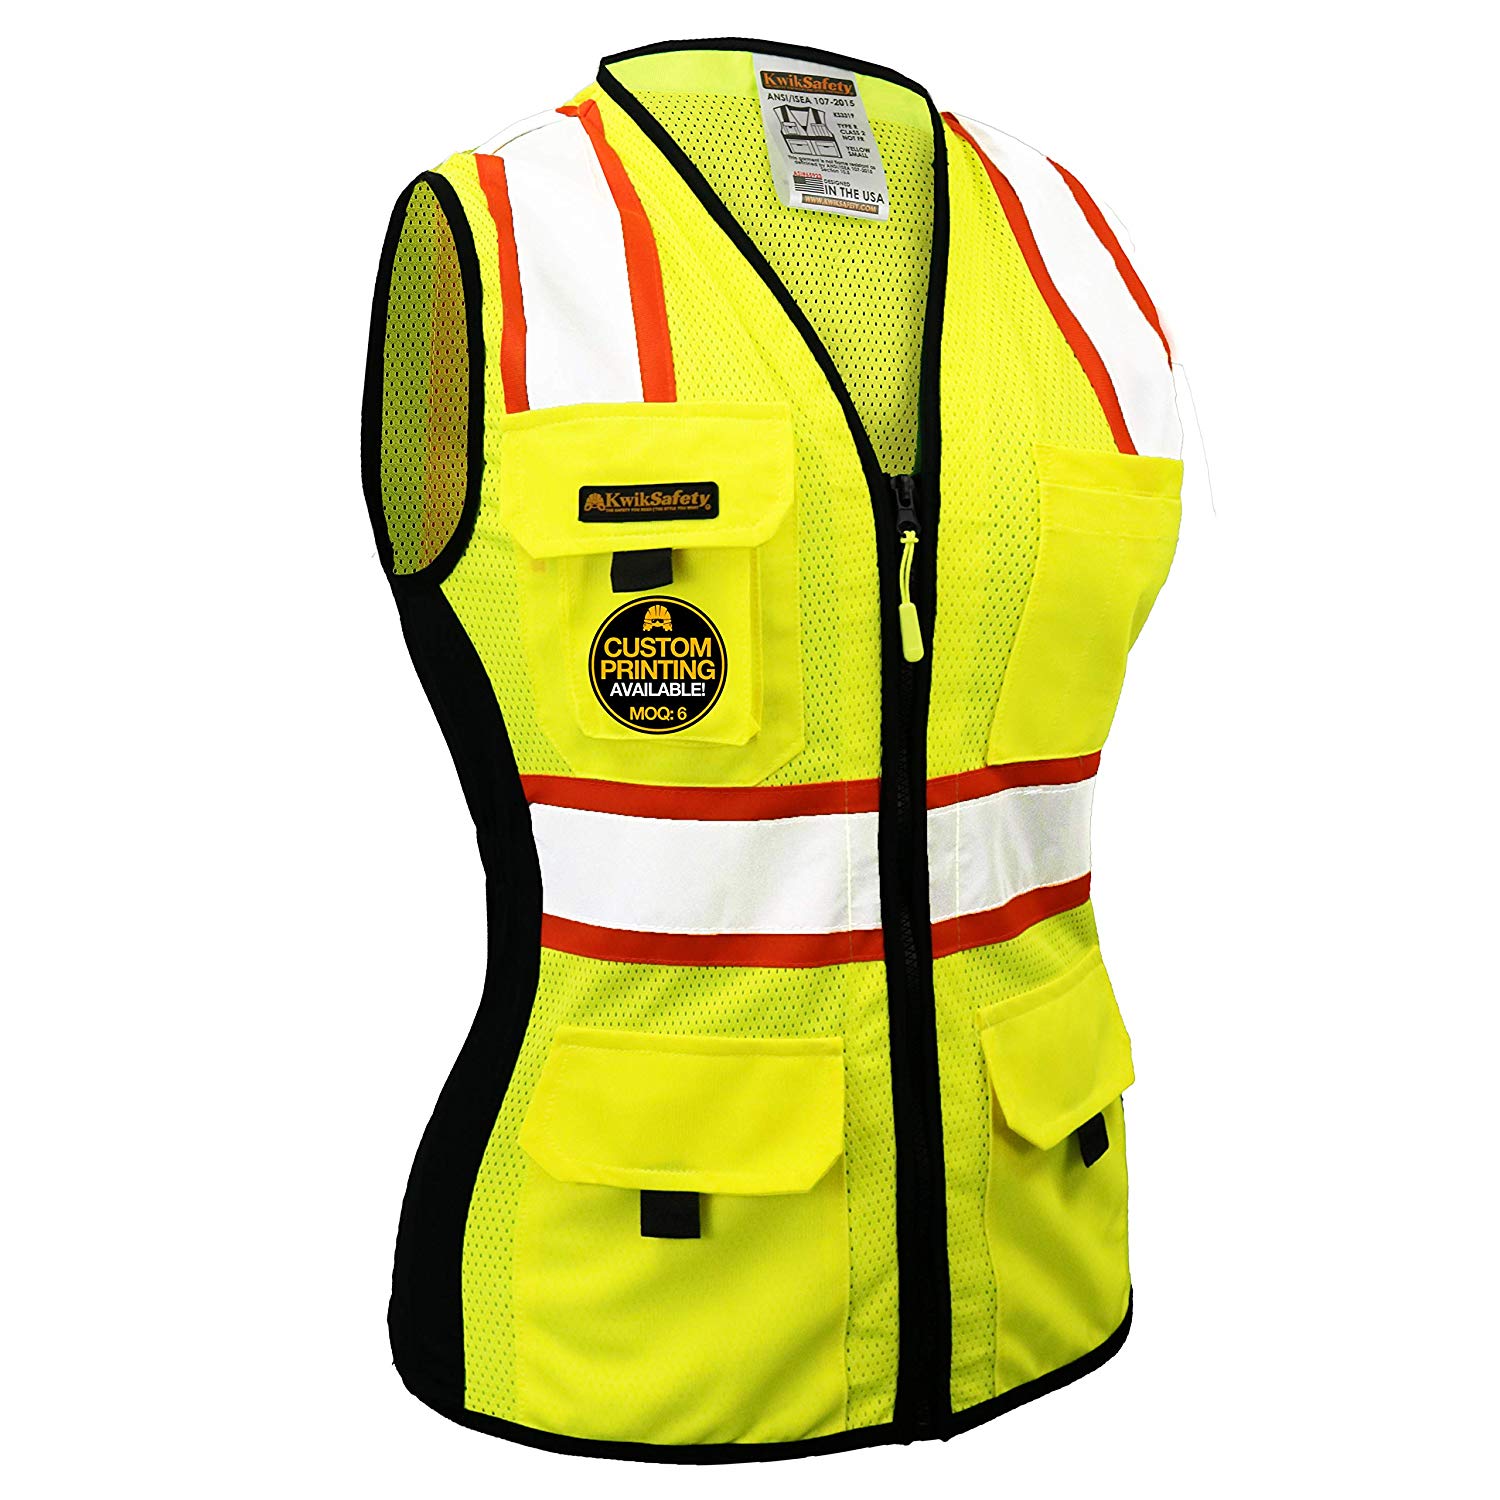 Top 10 Best Reflective Vests For Women - Top Value Reviews 4A8